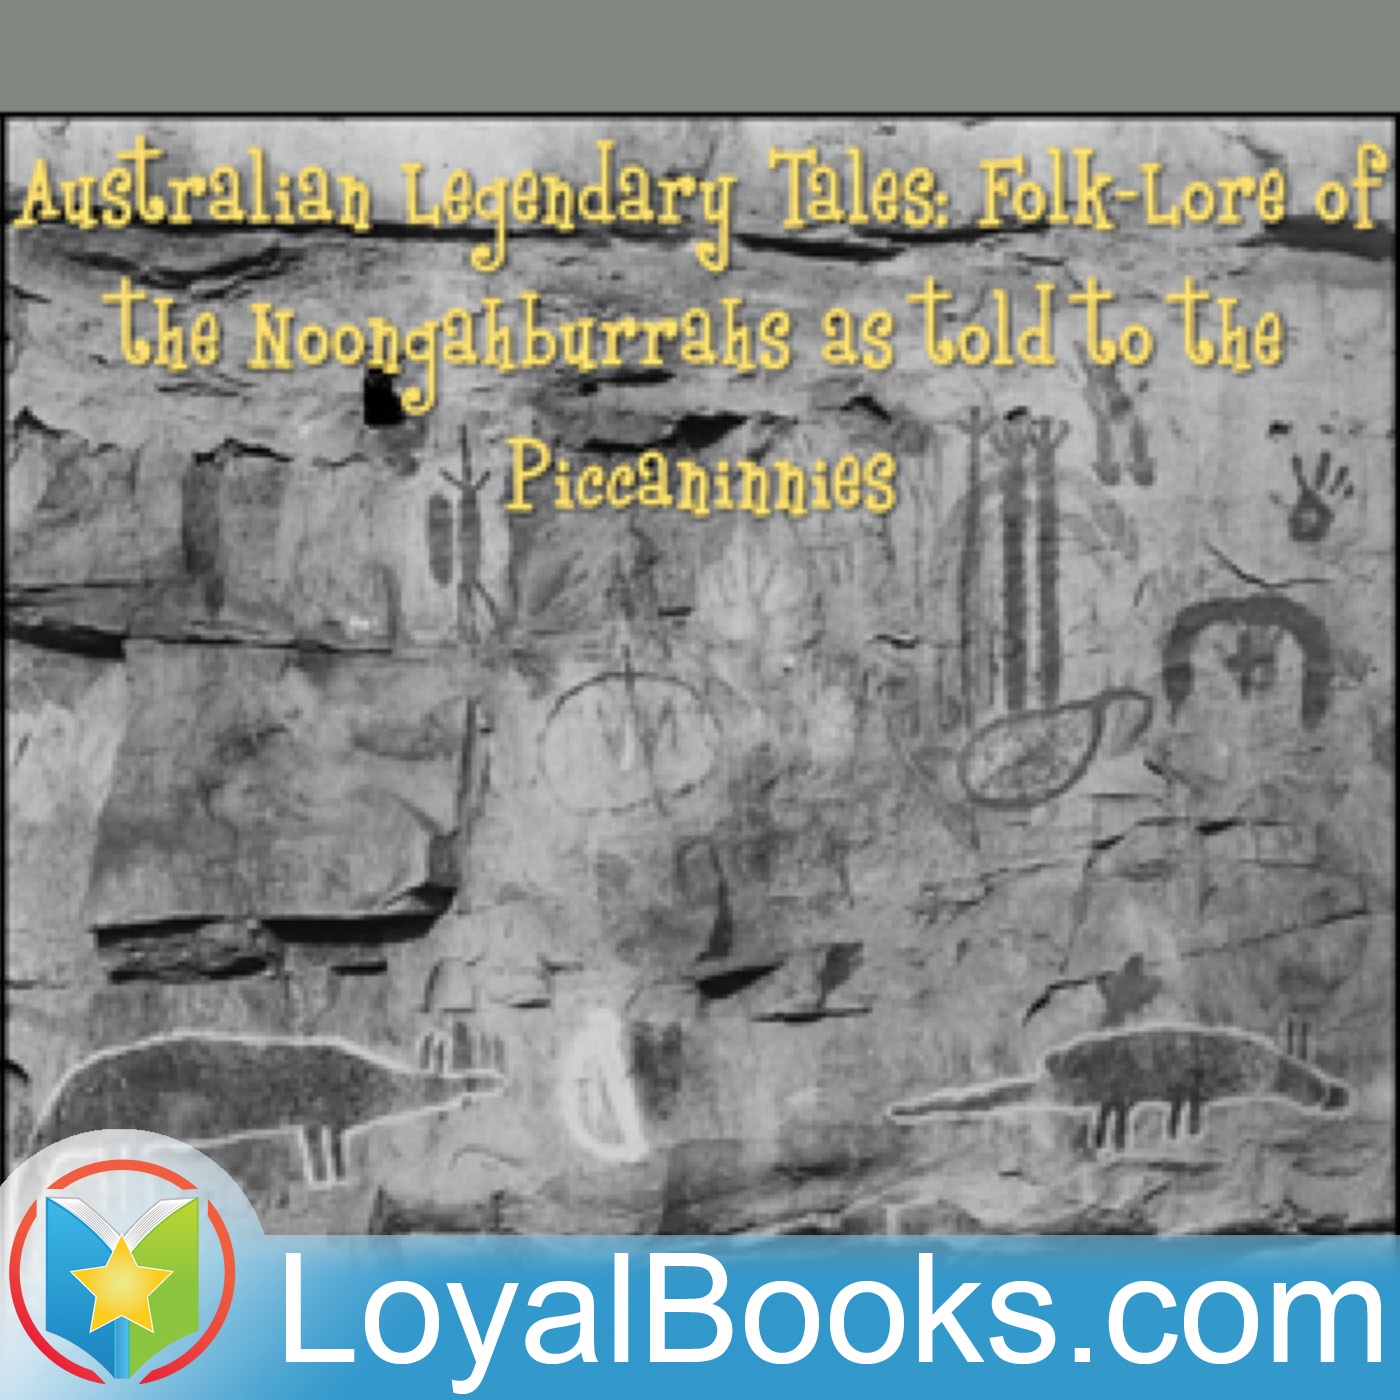 Australian Legendary Tales Folk-Lore of the Noongahburrahs As Told To The Piccaninnies by K. Langloh...